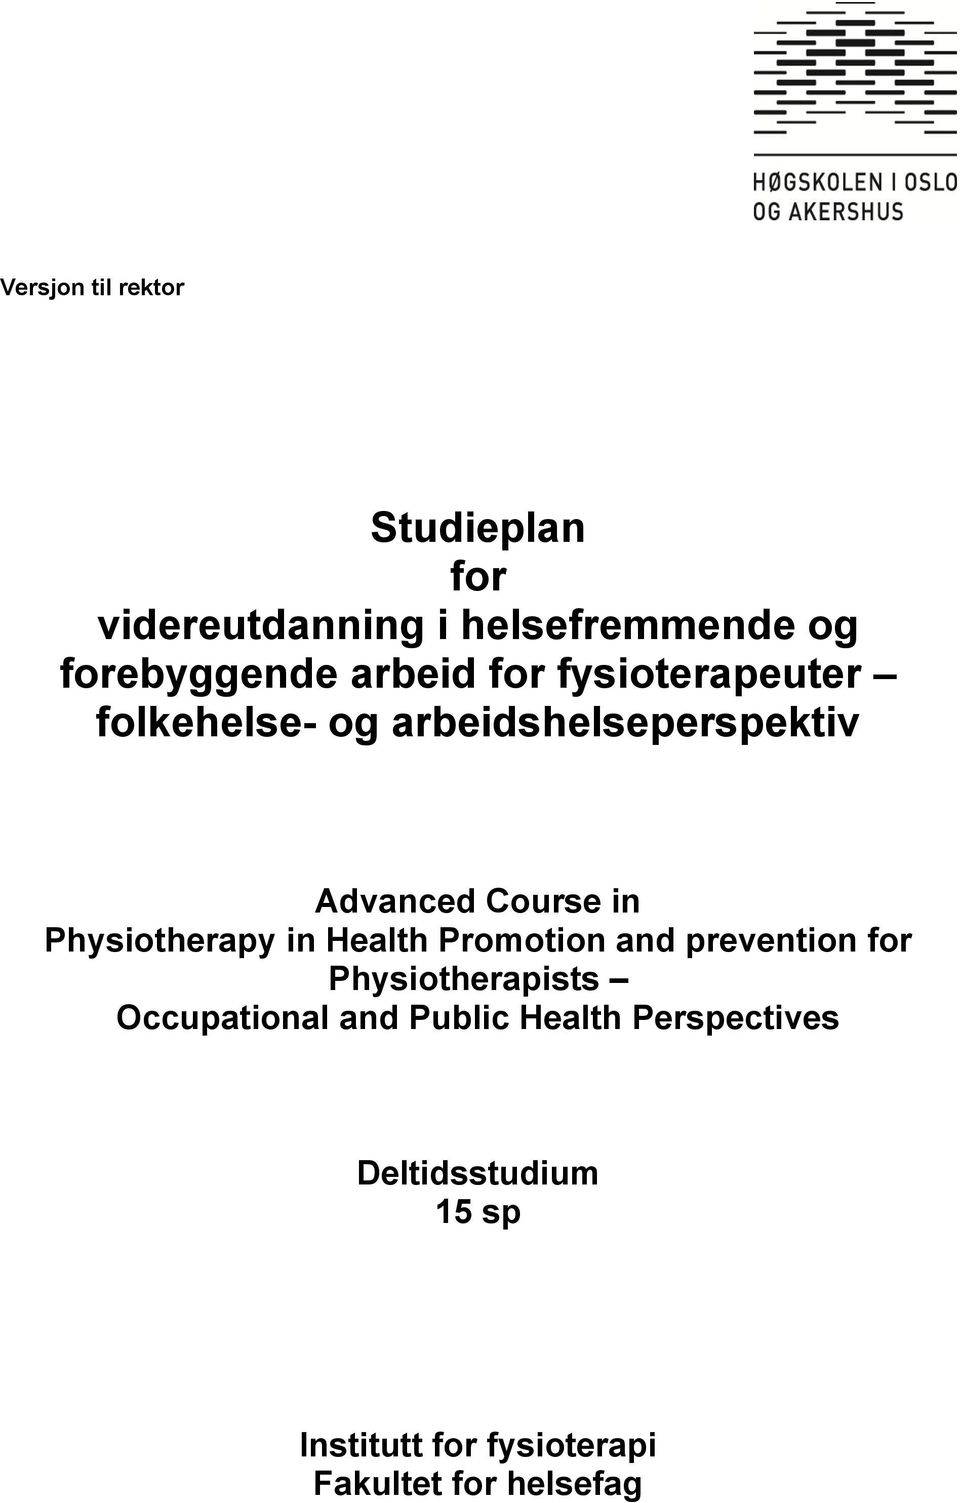 Physiotherapy in Health Promotion and prevention for Physiotherapists Occupational and